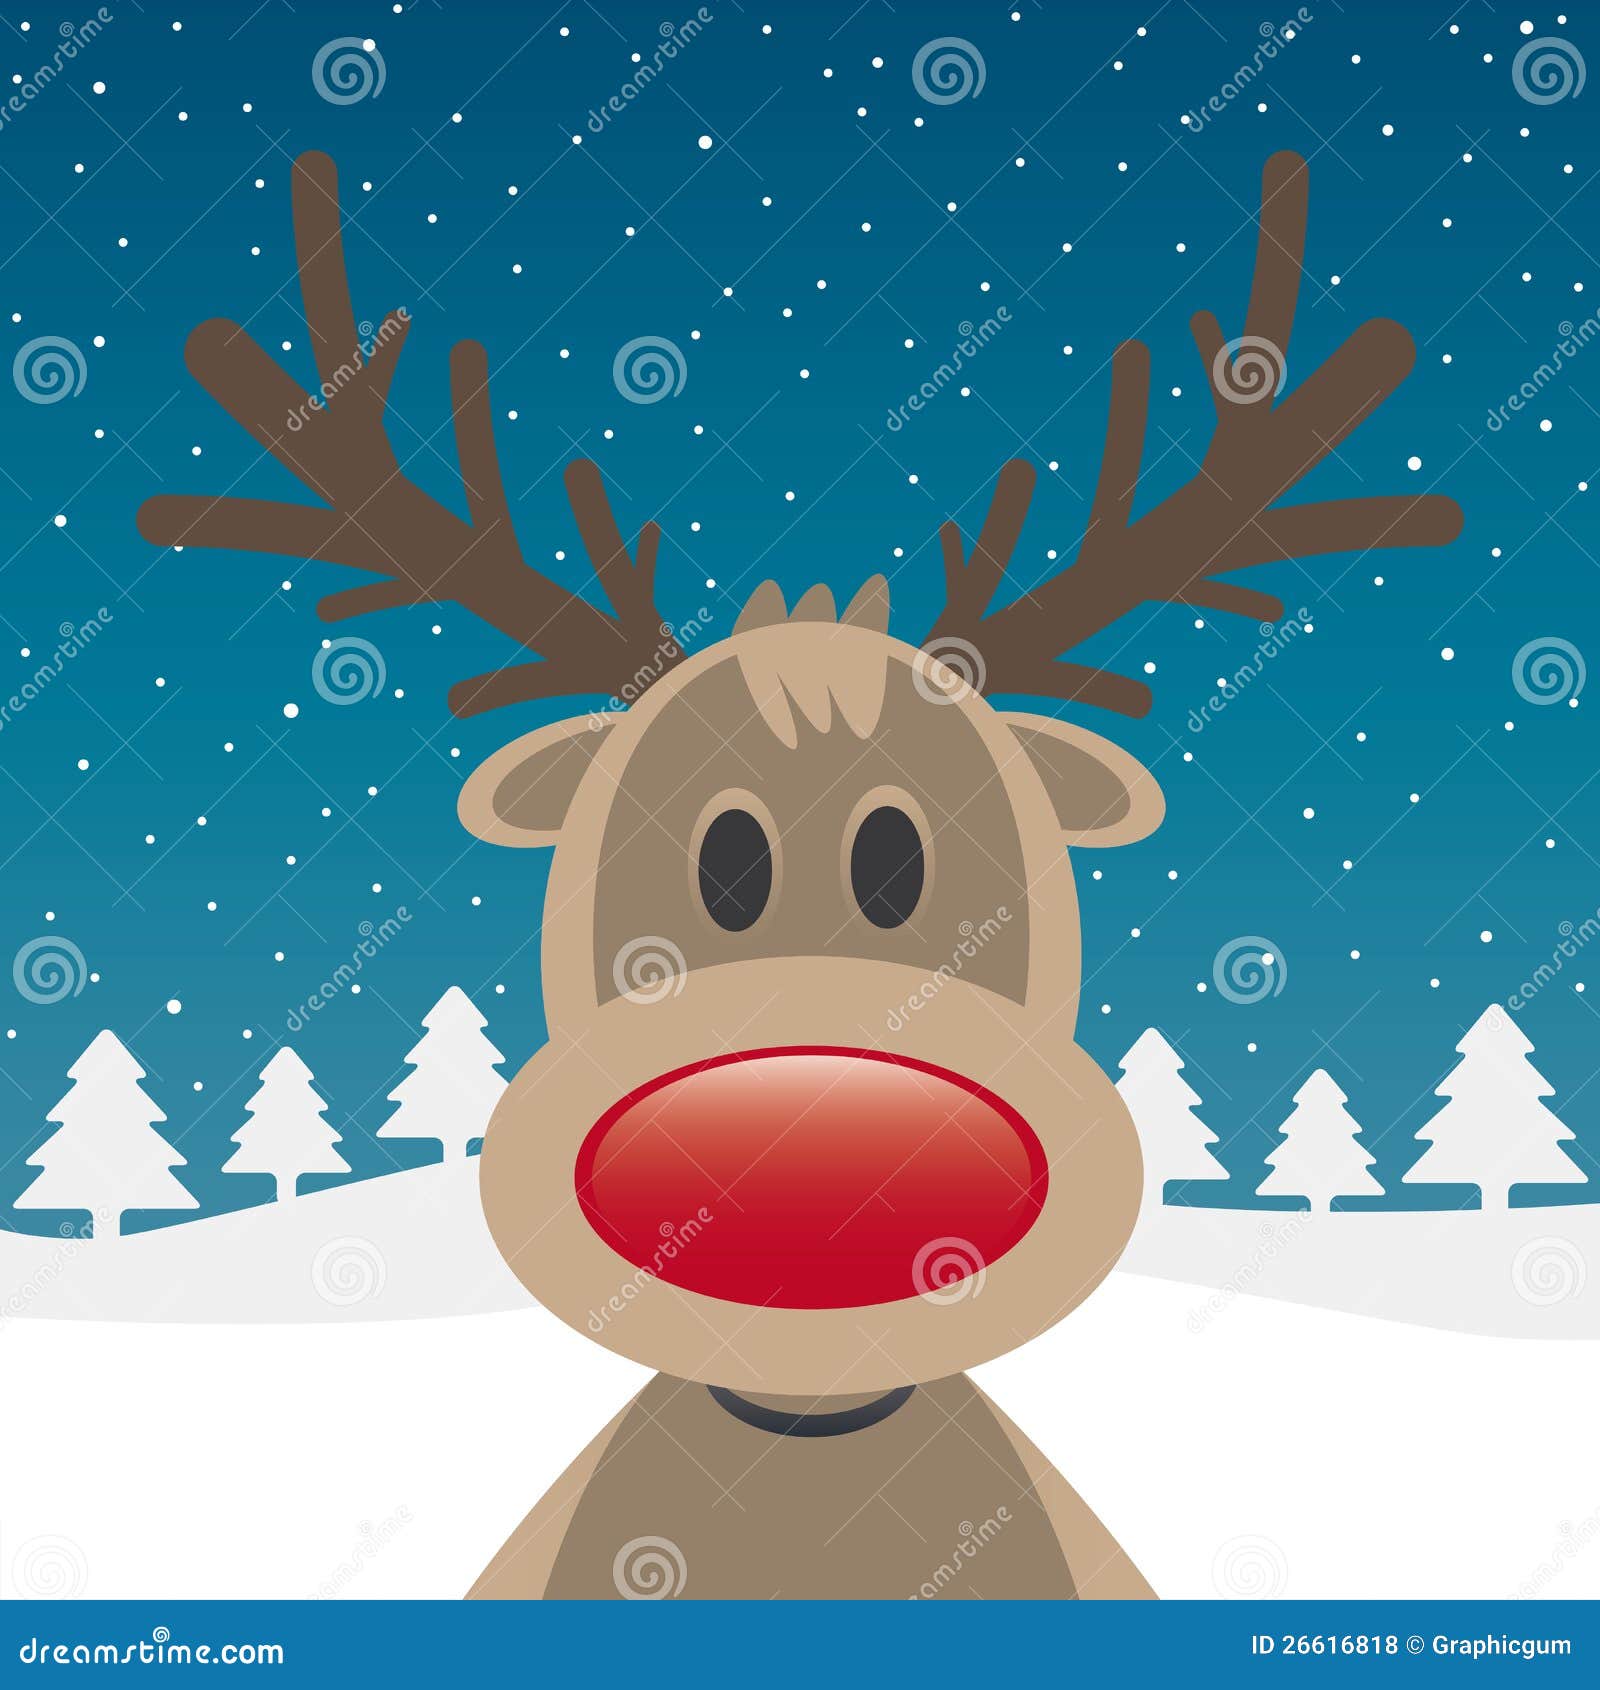 Rudolph The Reindeer Christmas And New Year Banner Stock Photo ...